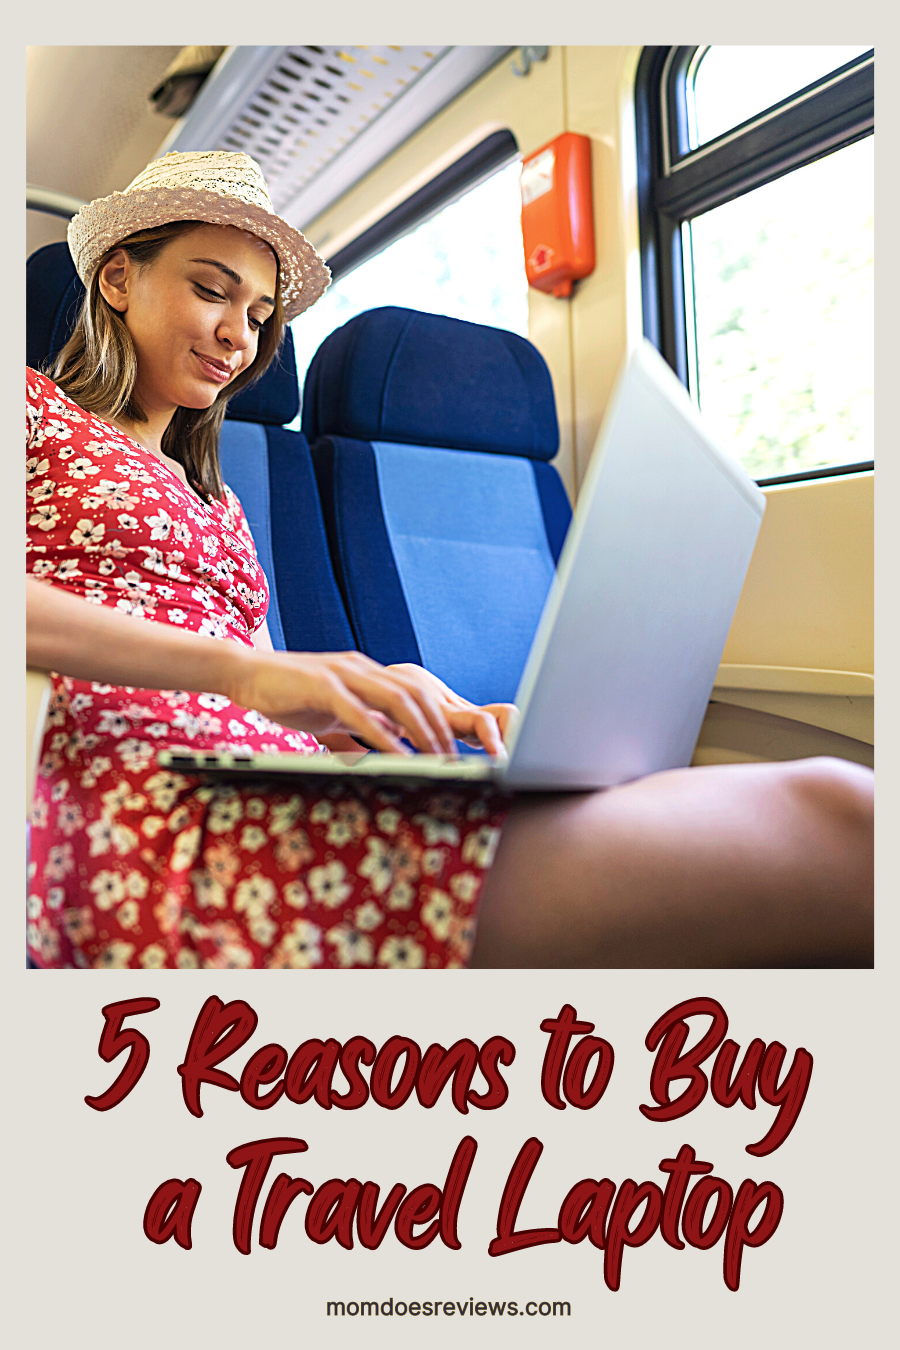 5 Reasons to Purchase a Travel Laptop